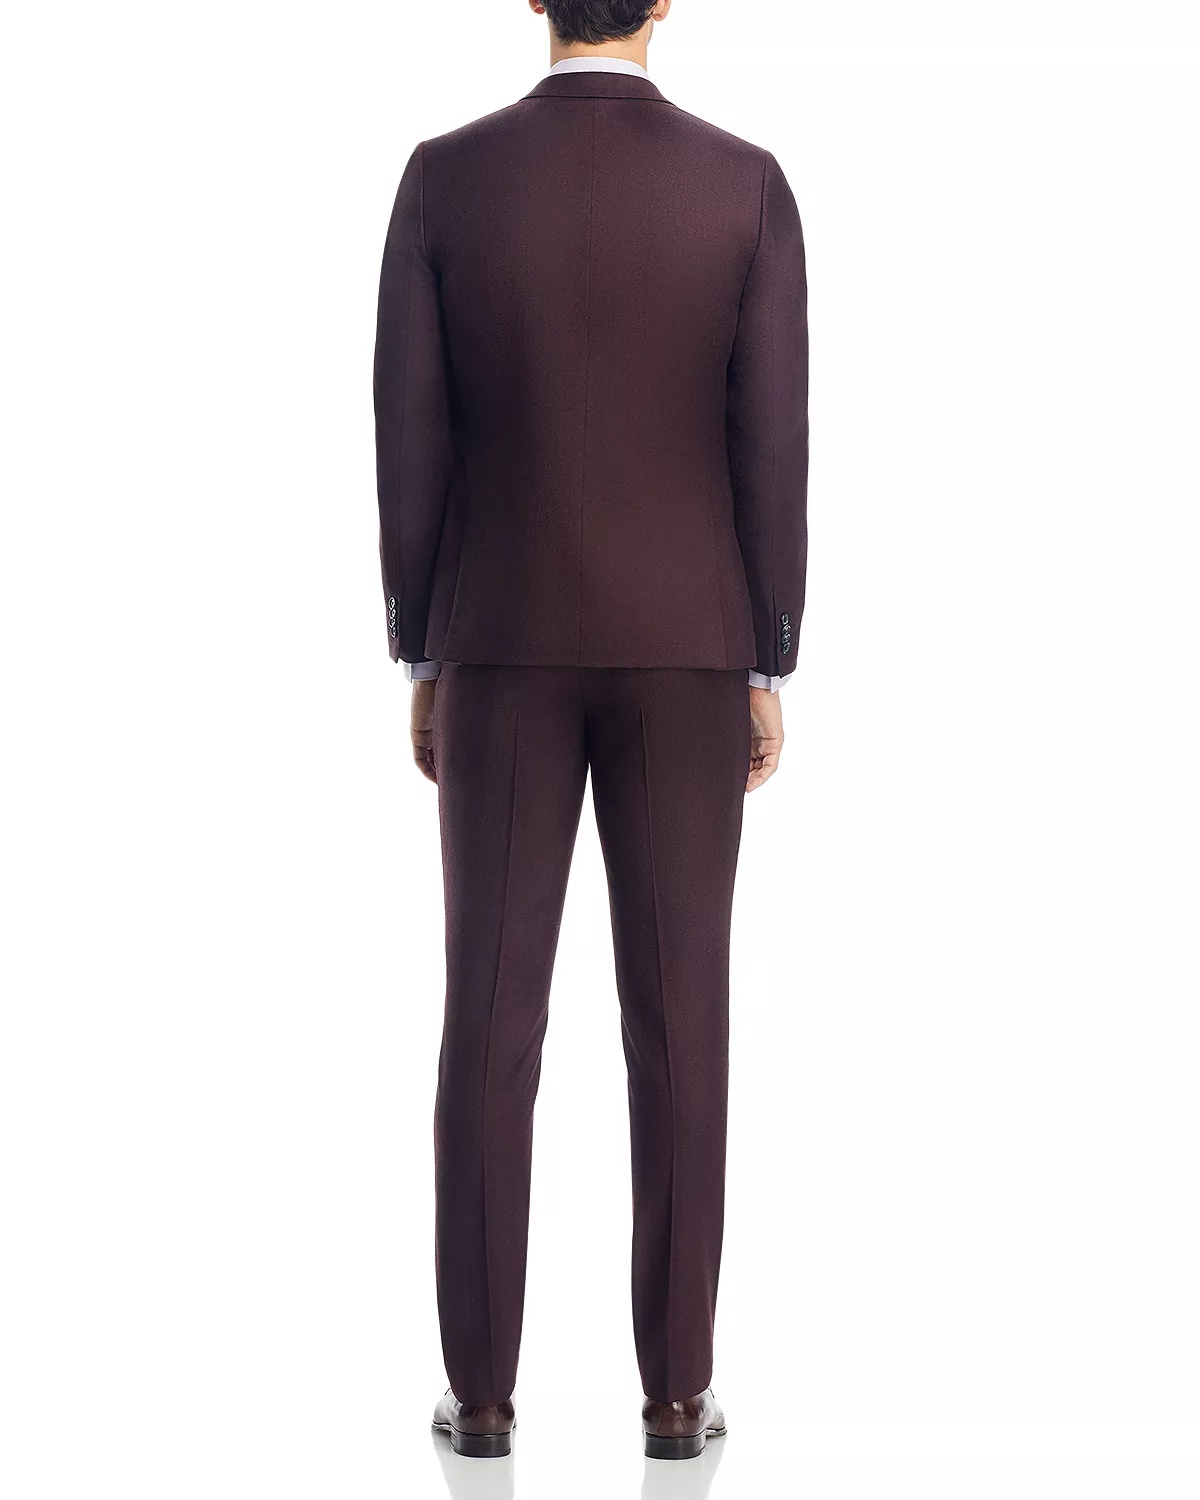 Wool & Cashmere Extra Slim Fit Suit - 11